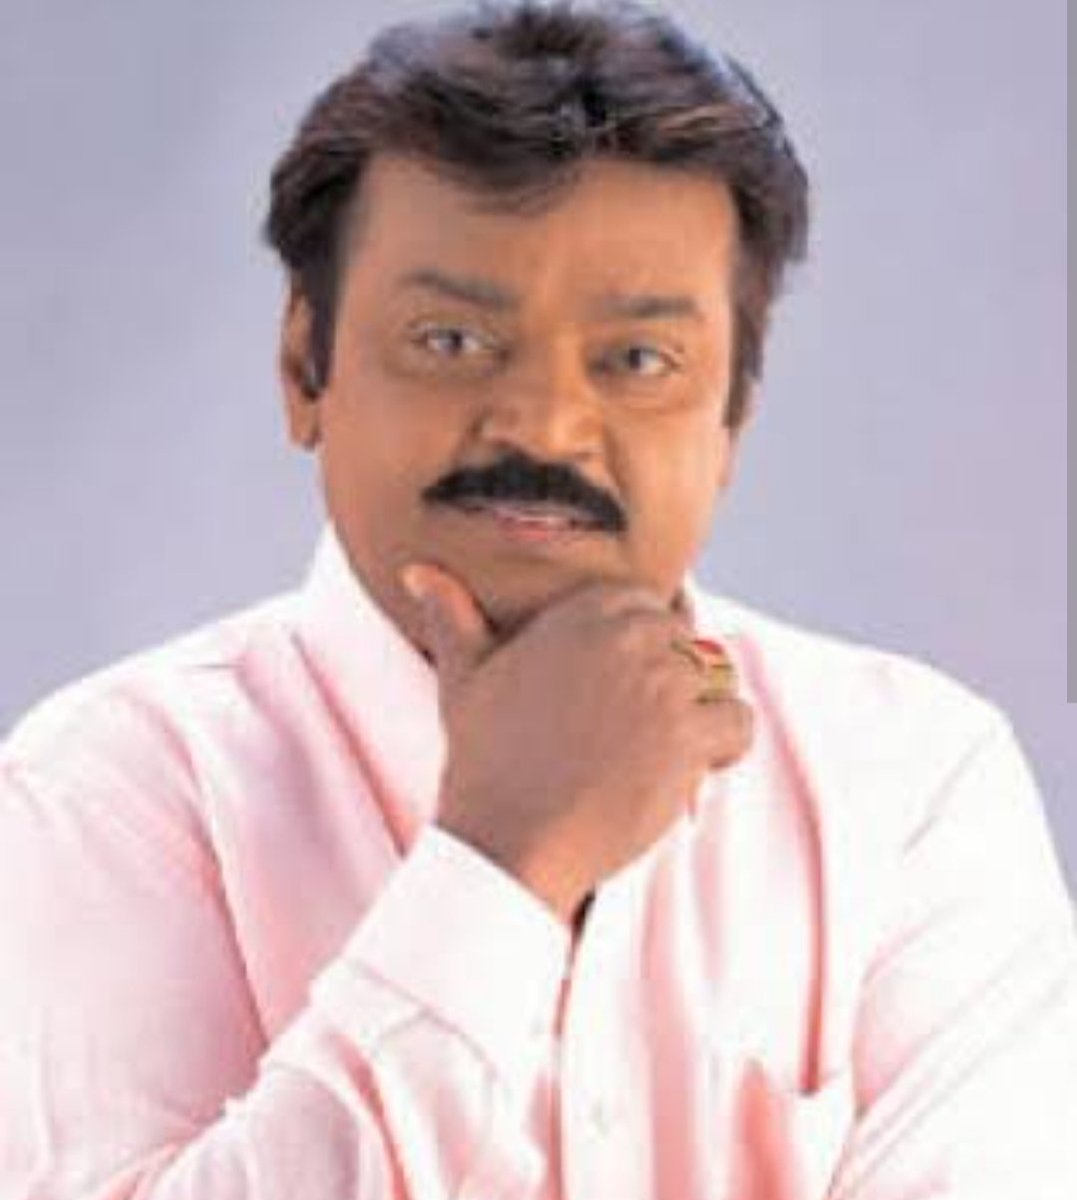 #RipCaptianVijayakanth We lost a Good Human. May the soul rest in peace. My deepest condolences. #RIPVijayakanth #vijayakanth